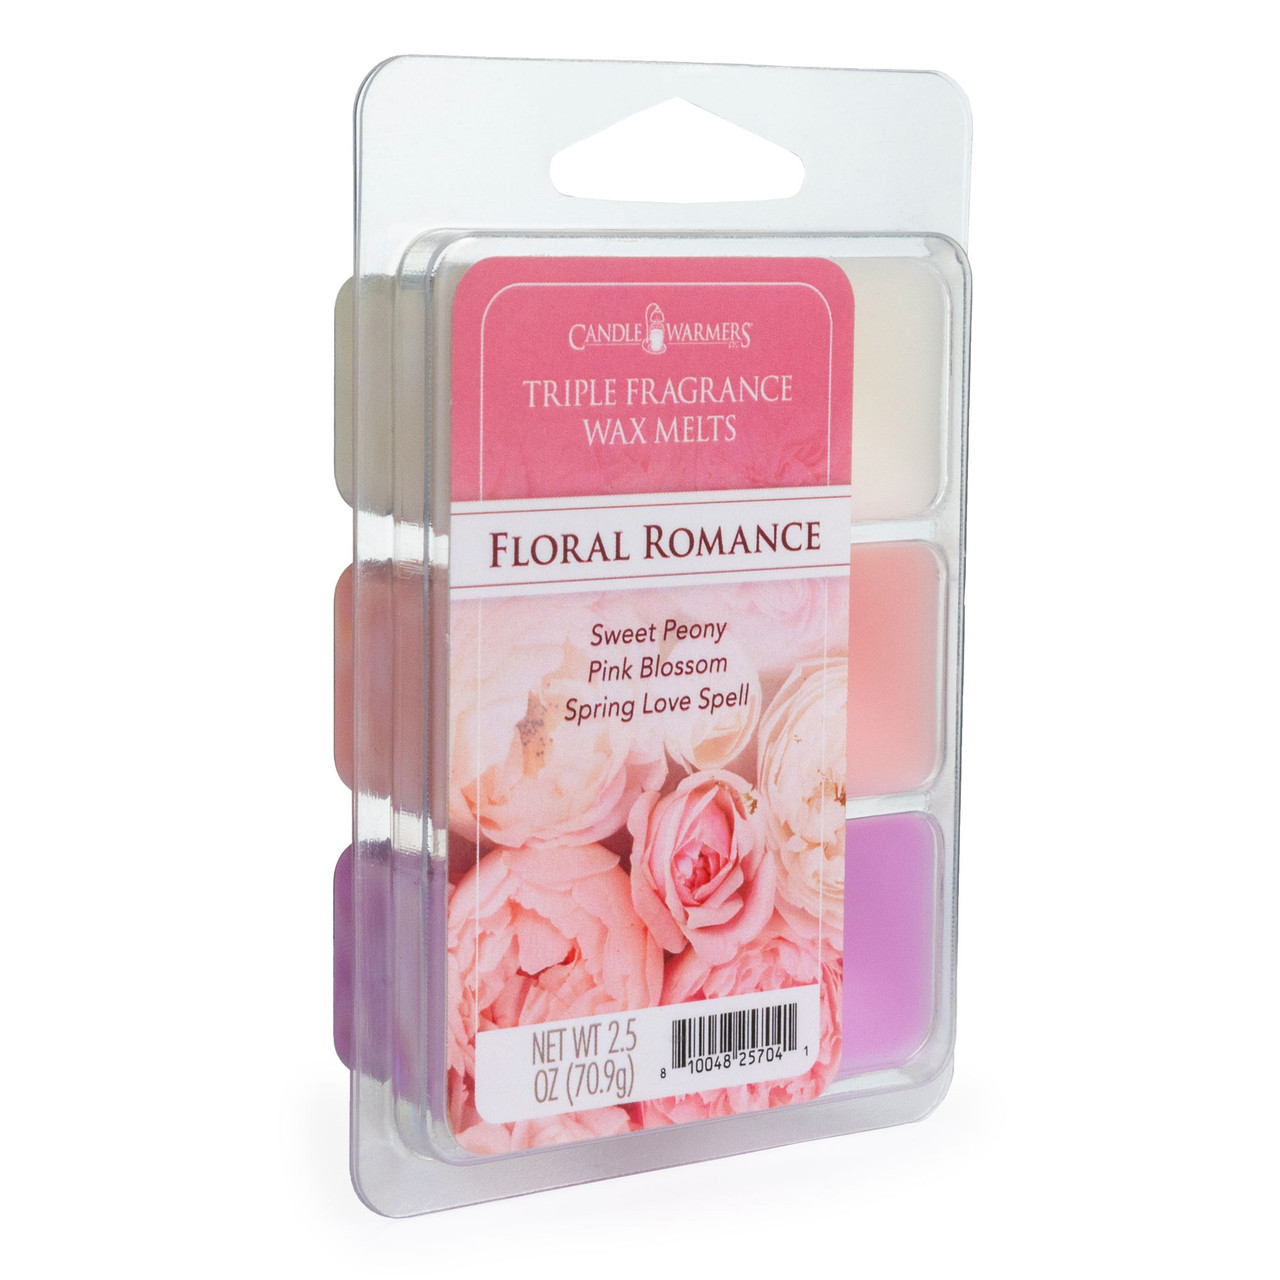 Candle Warmers Triple Fragrance Wax Melts - Floral Romance